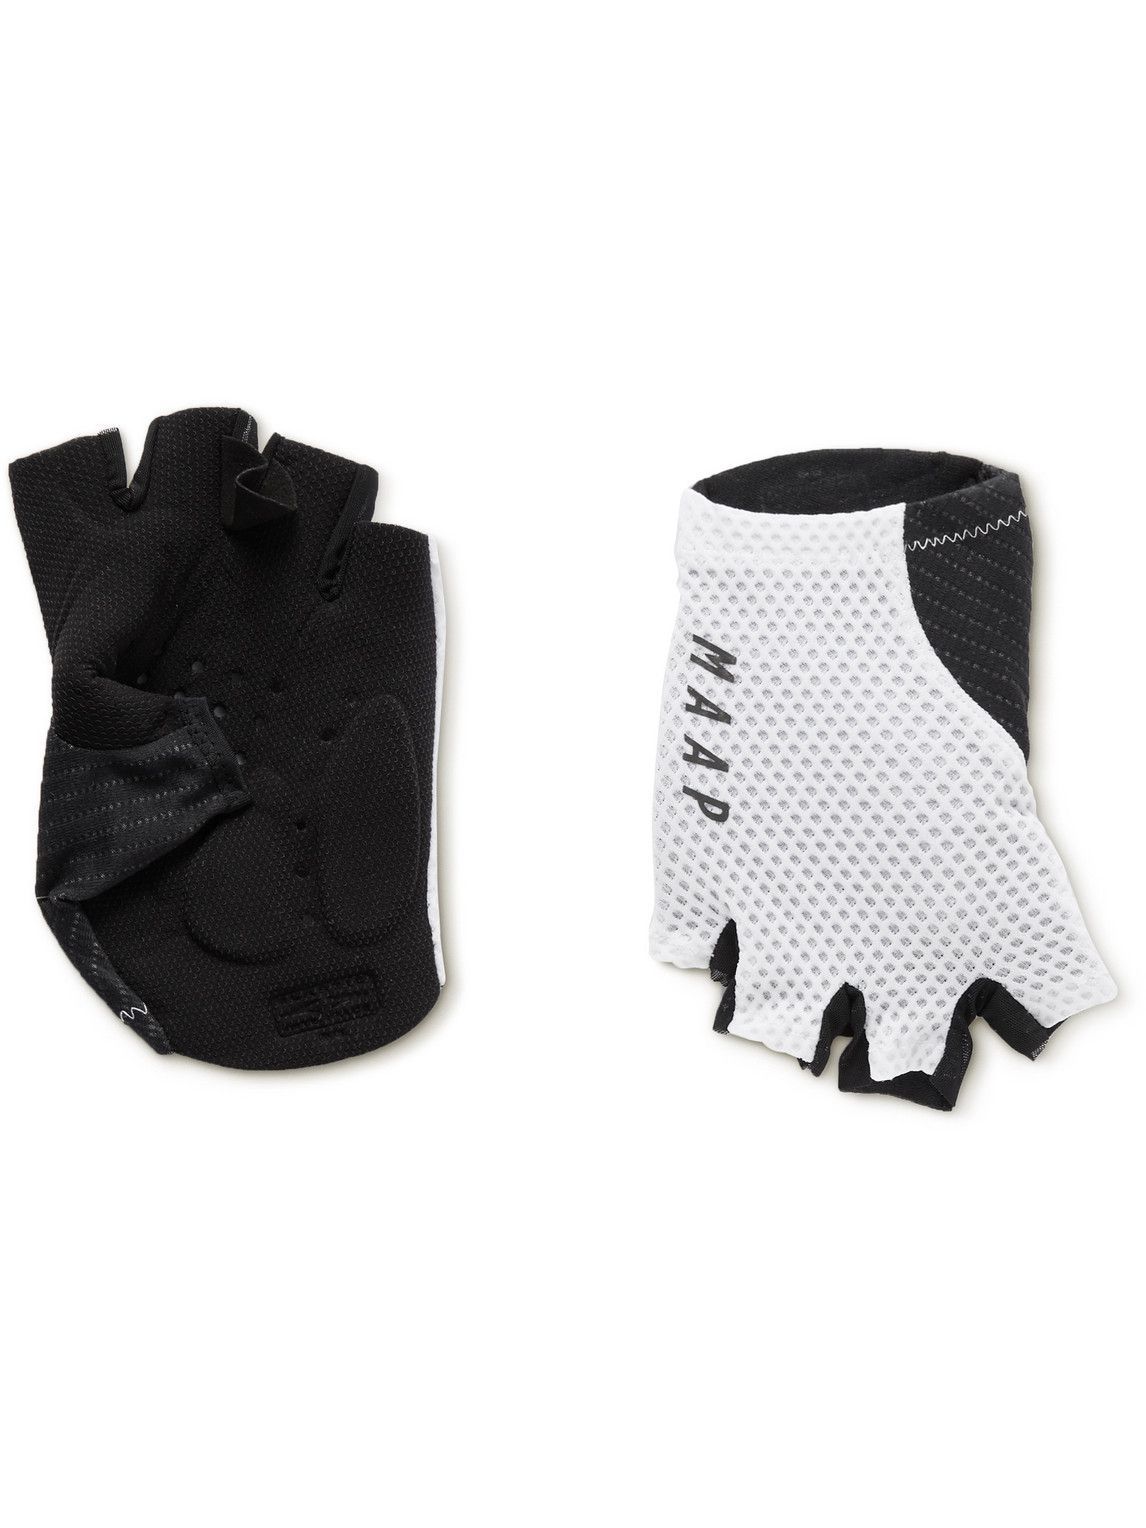 Photo: MAAP - Pro Race Hybrid Cell System and Mesh Cycling Gloves - White